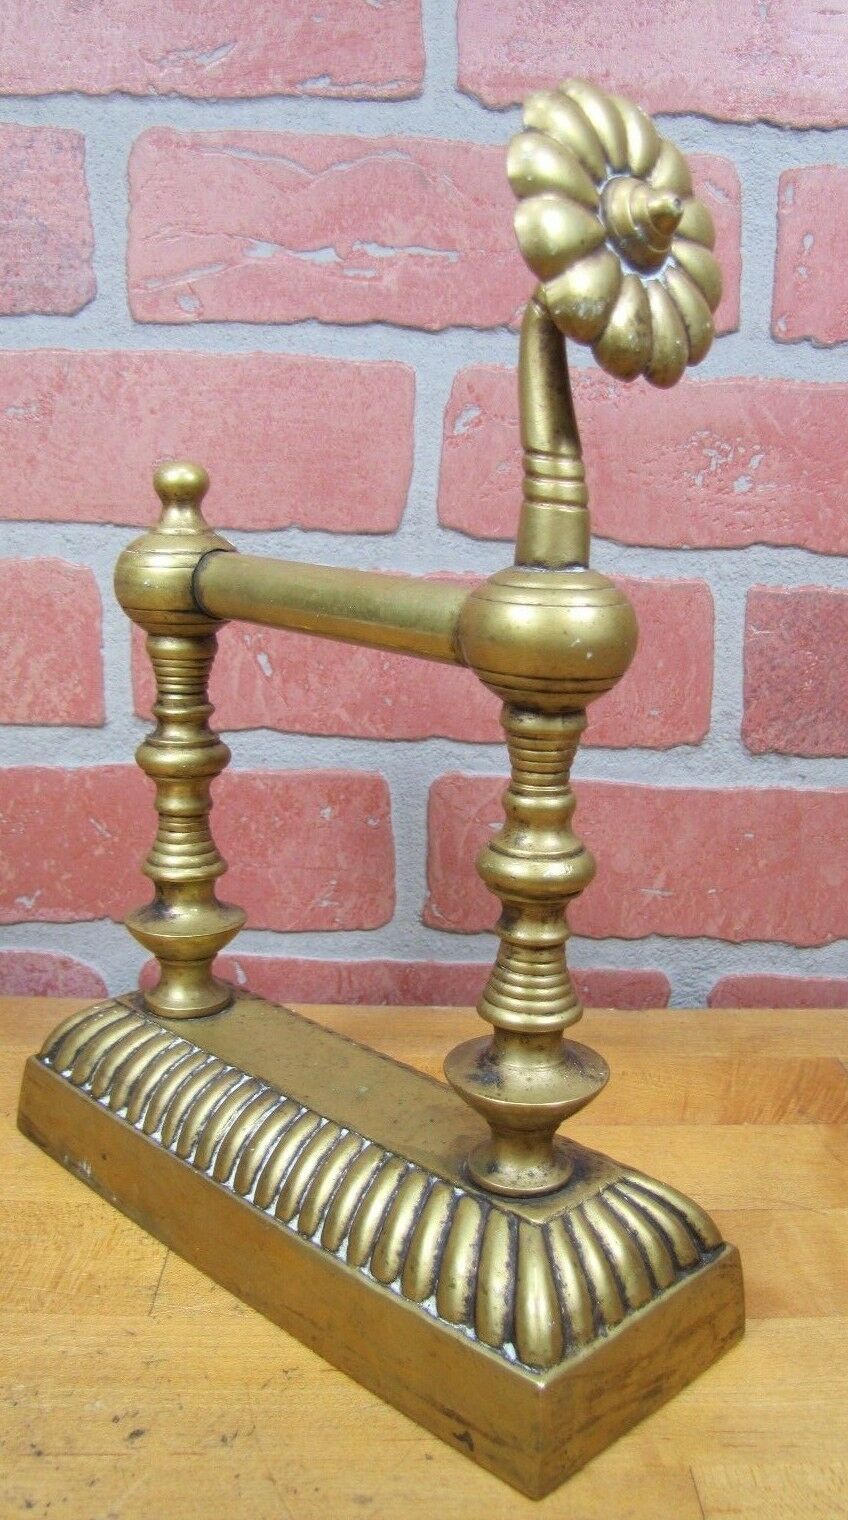 Antique Fireplace Tool Rest Brass Decorative Arts Hearth Ware Flower Ornate